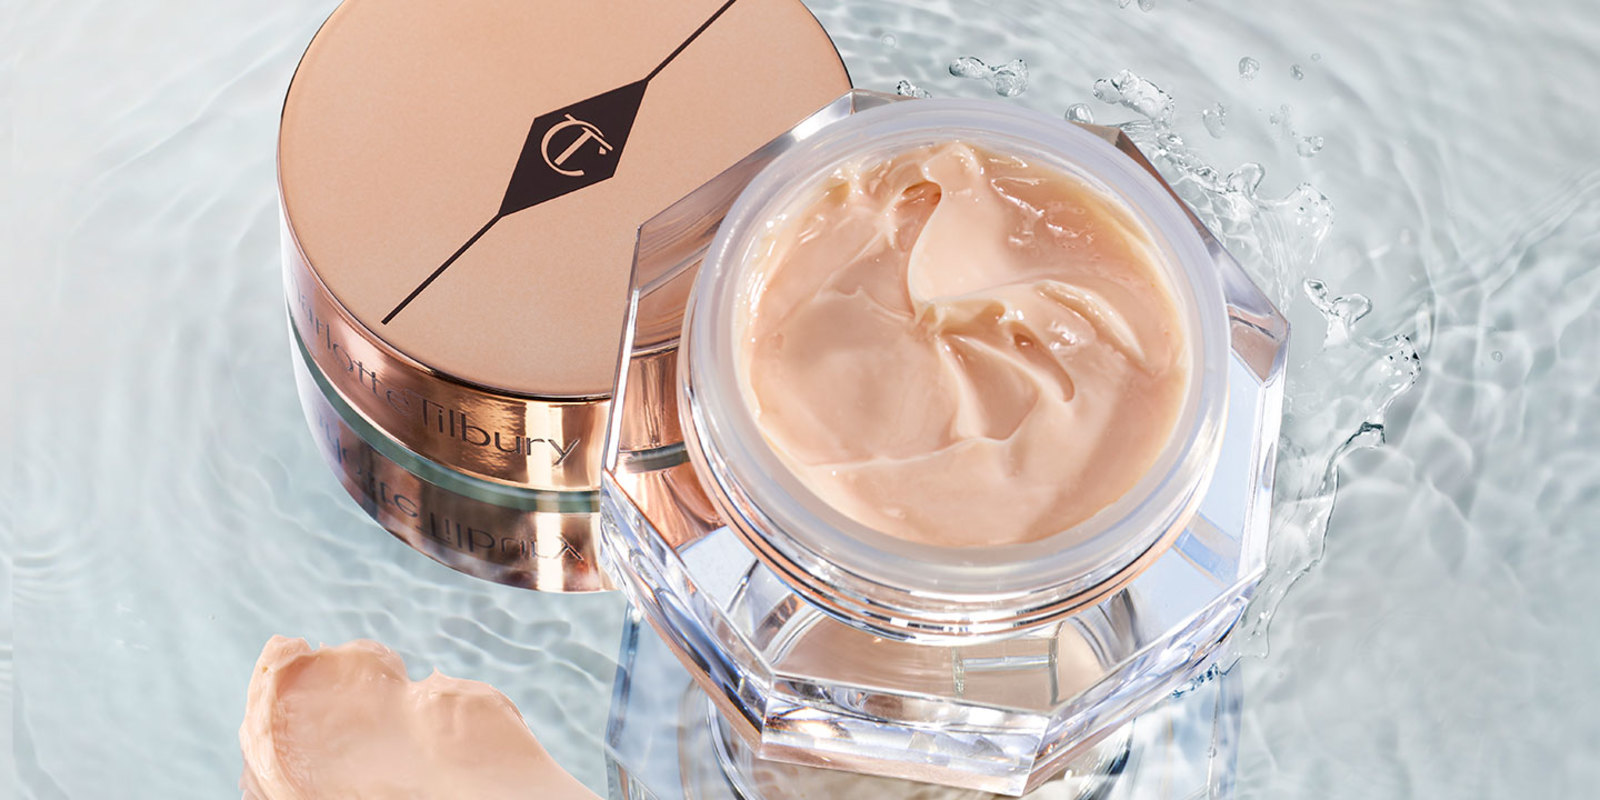 An open, petite jar filled with a thick peach-coloured eye cream with its golden-coloured lid next to it, both on top of crystal-clear water.